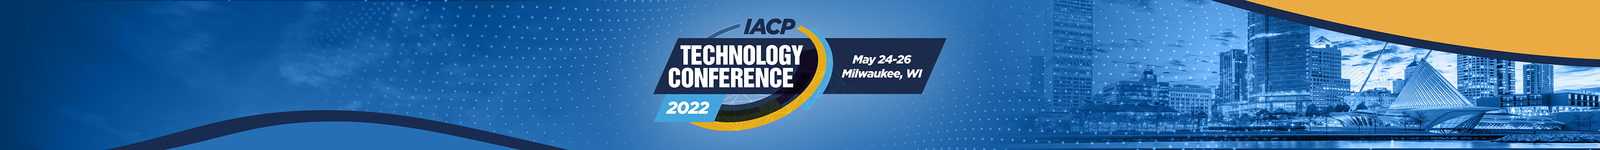 The IACP Technology Conference 2022 logo